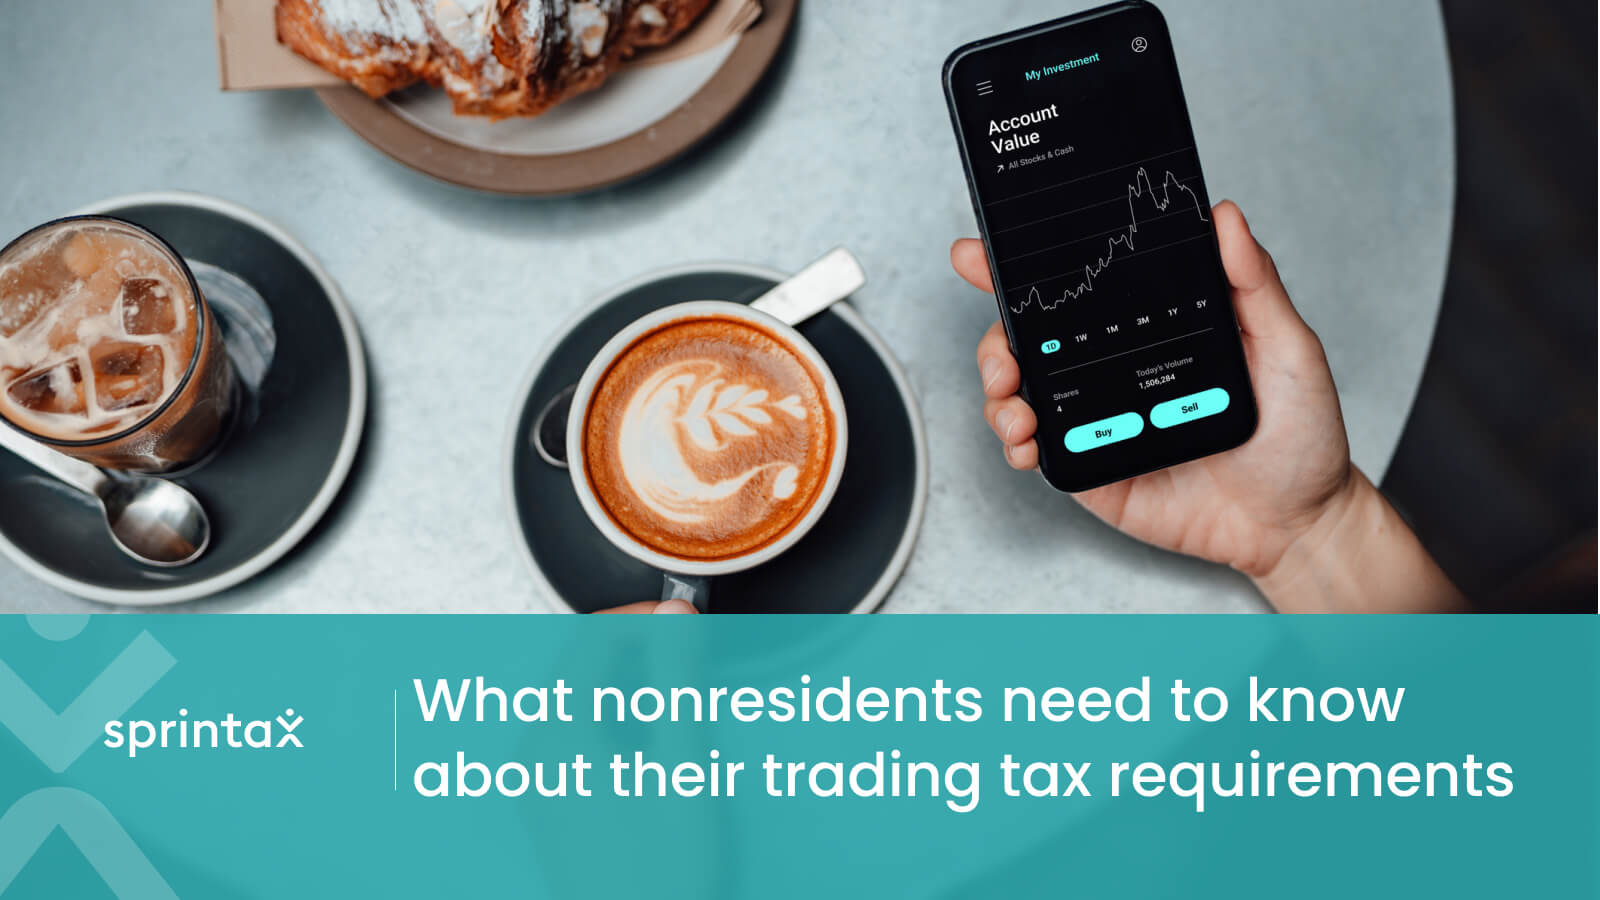 Is investment income taxable? | 2022 Nonresident alien guide